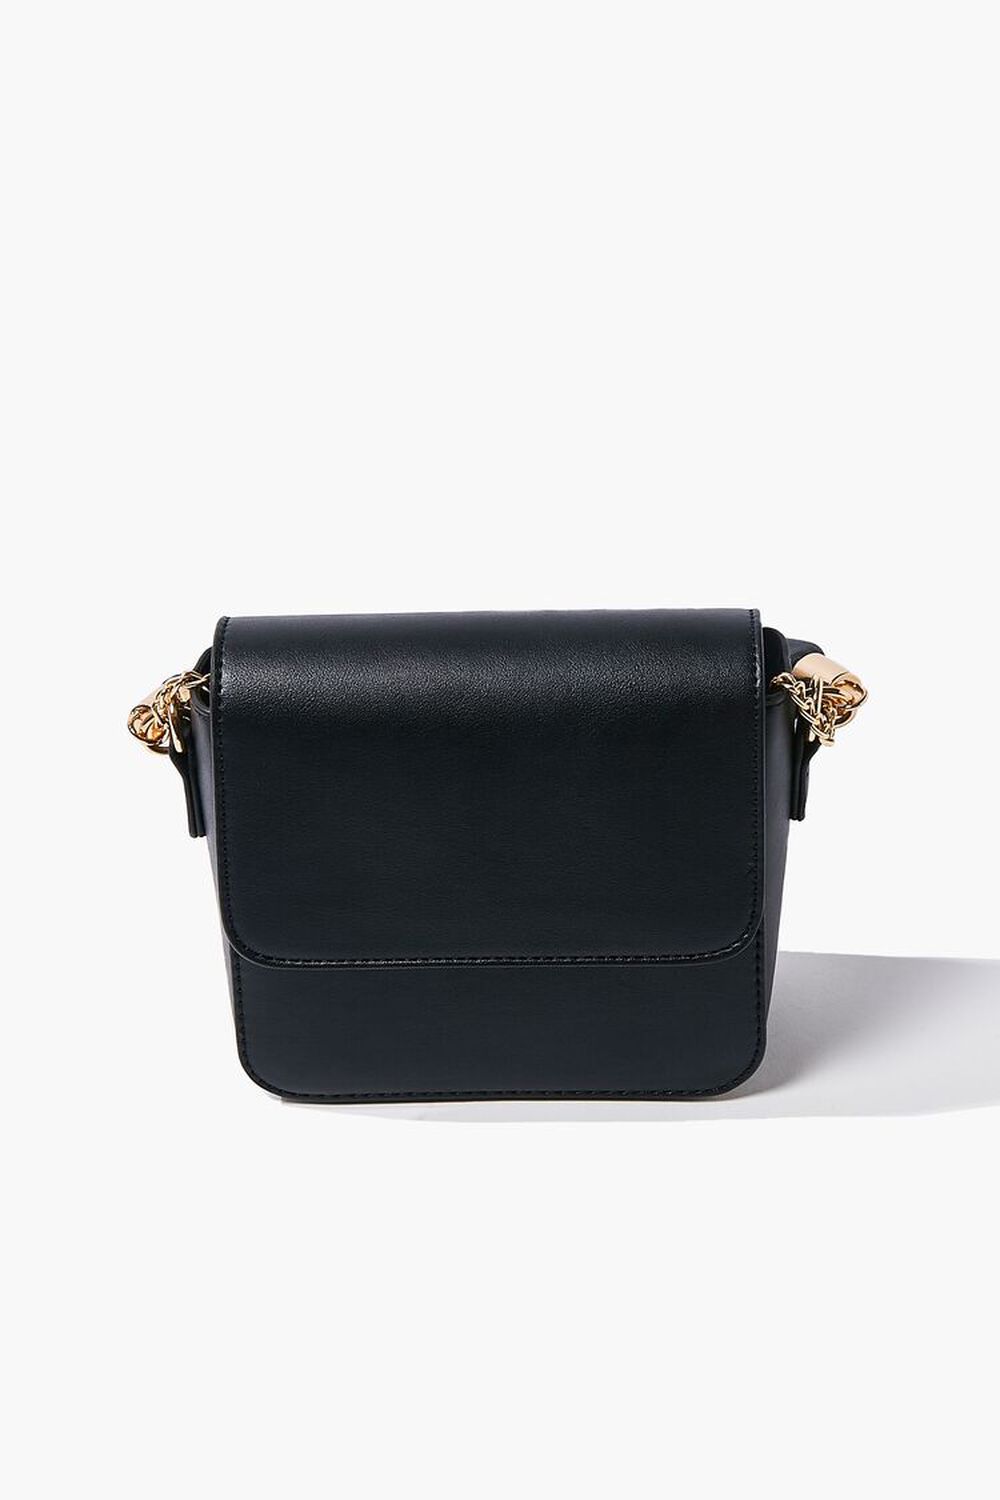 BLACK Ruched Faux Leather Crossbody Bag, image 1